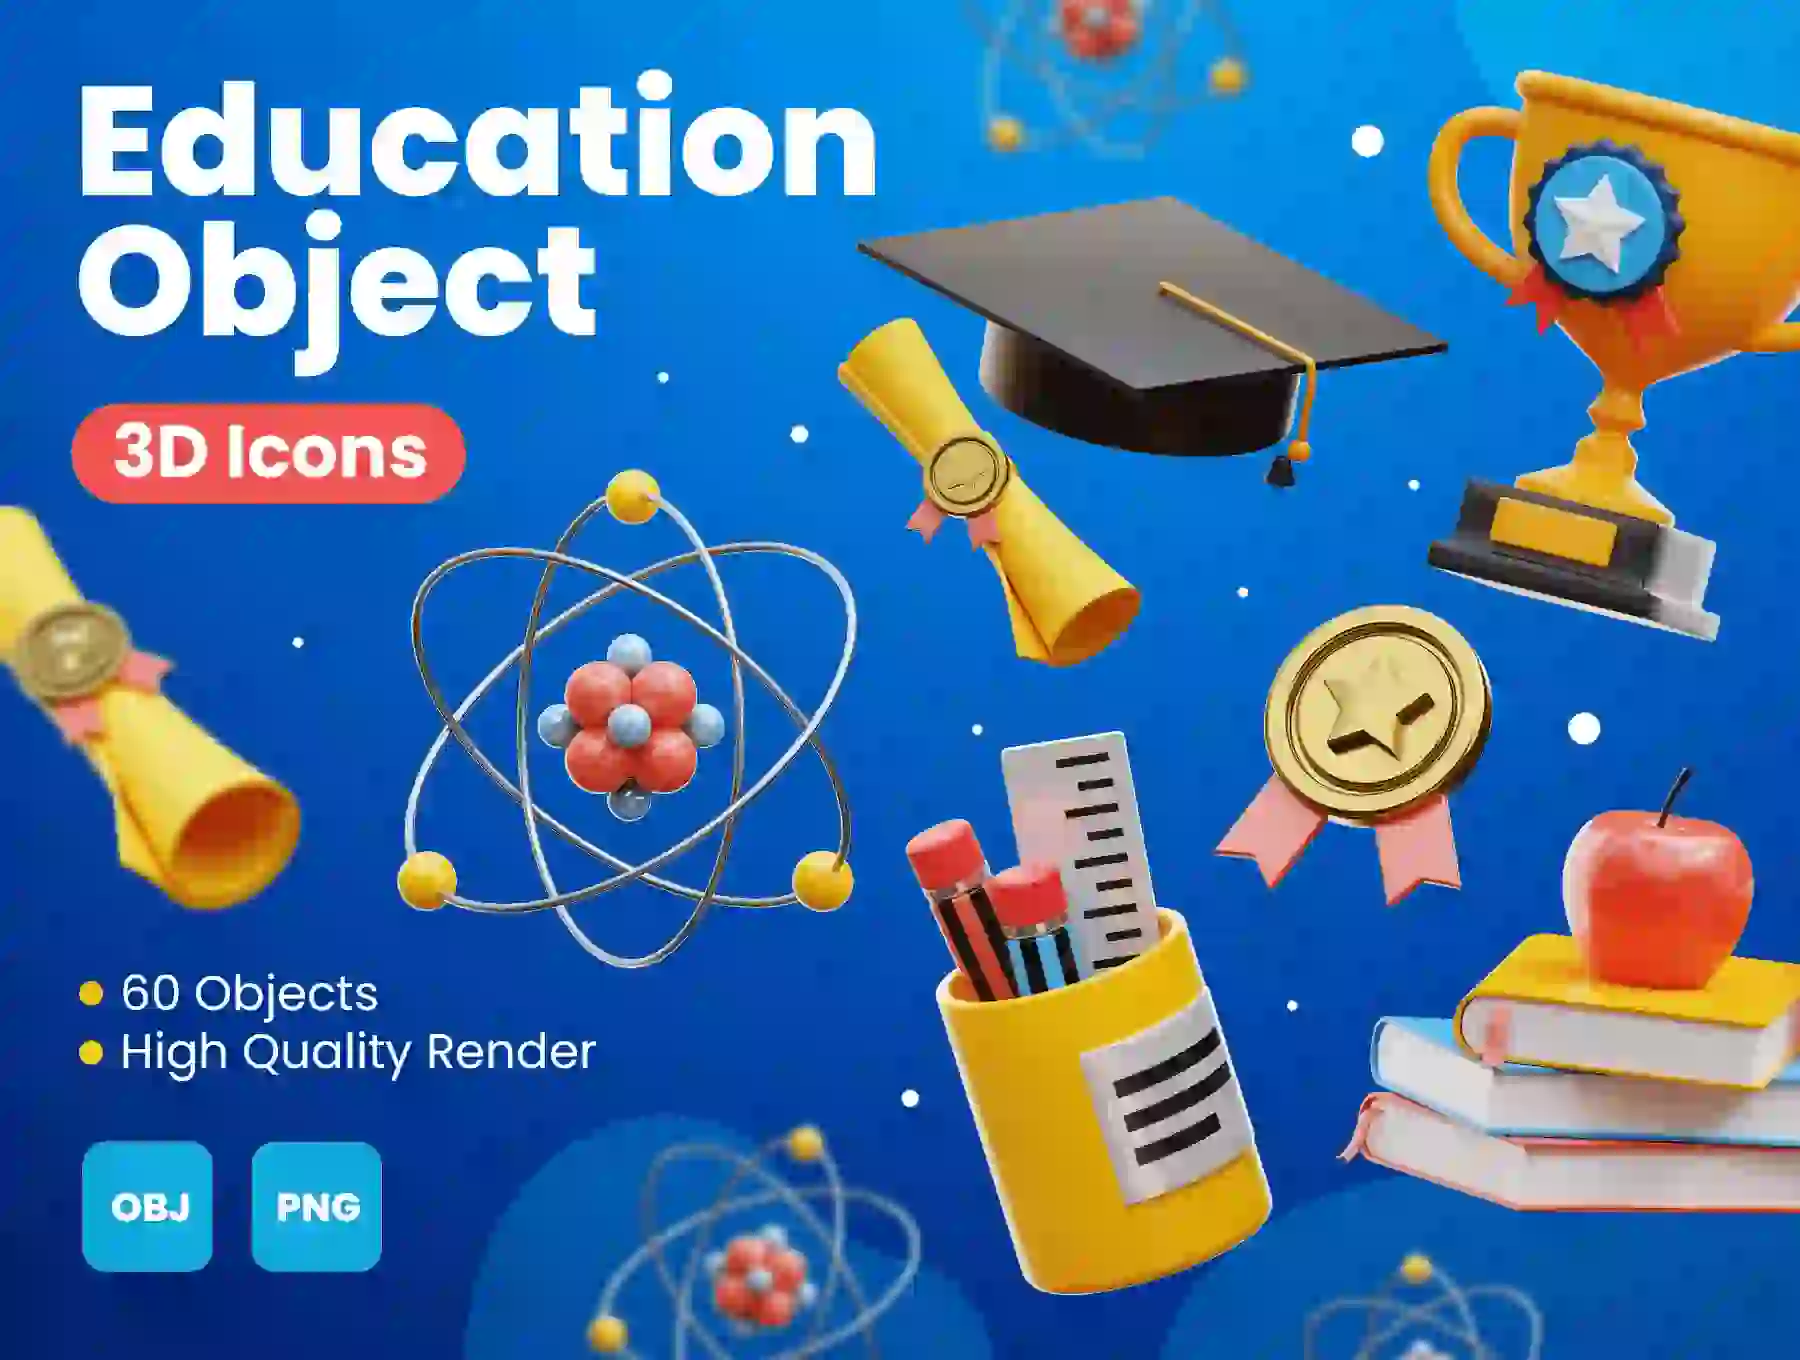 Education Object 3D Icons